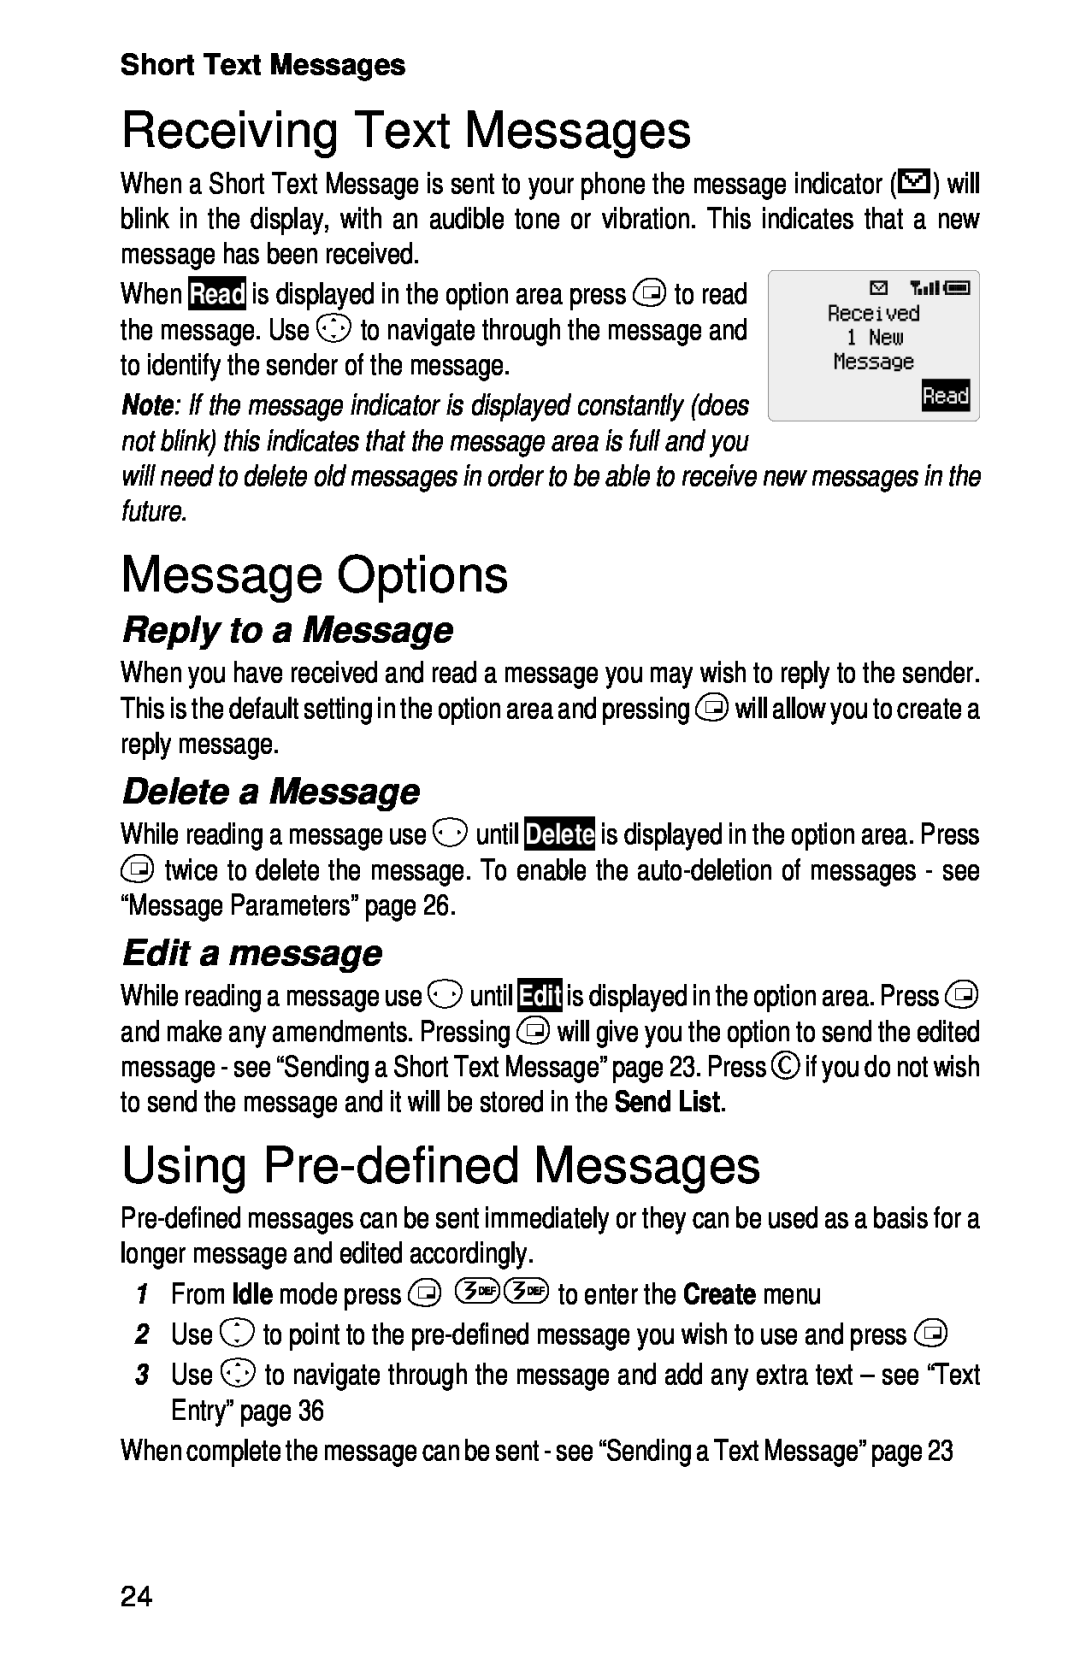 Panasonic EB-GD52 Receiving Text Messages, Message Options, Using Pre-defined Messages, Reply to a Message, Edit a message 